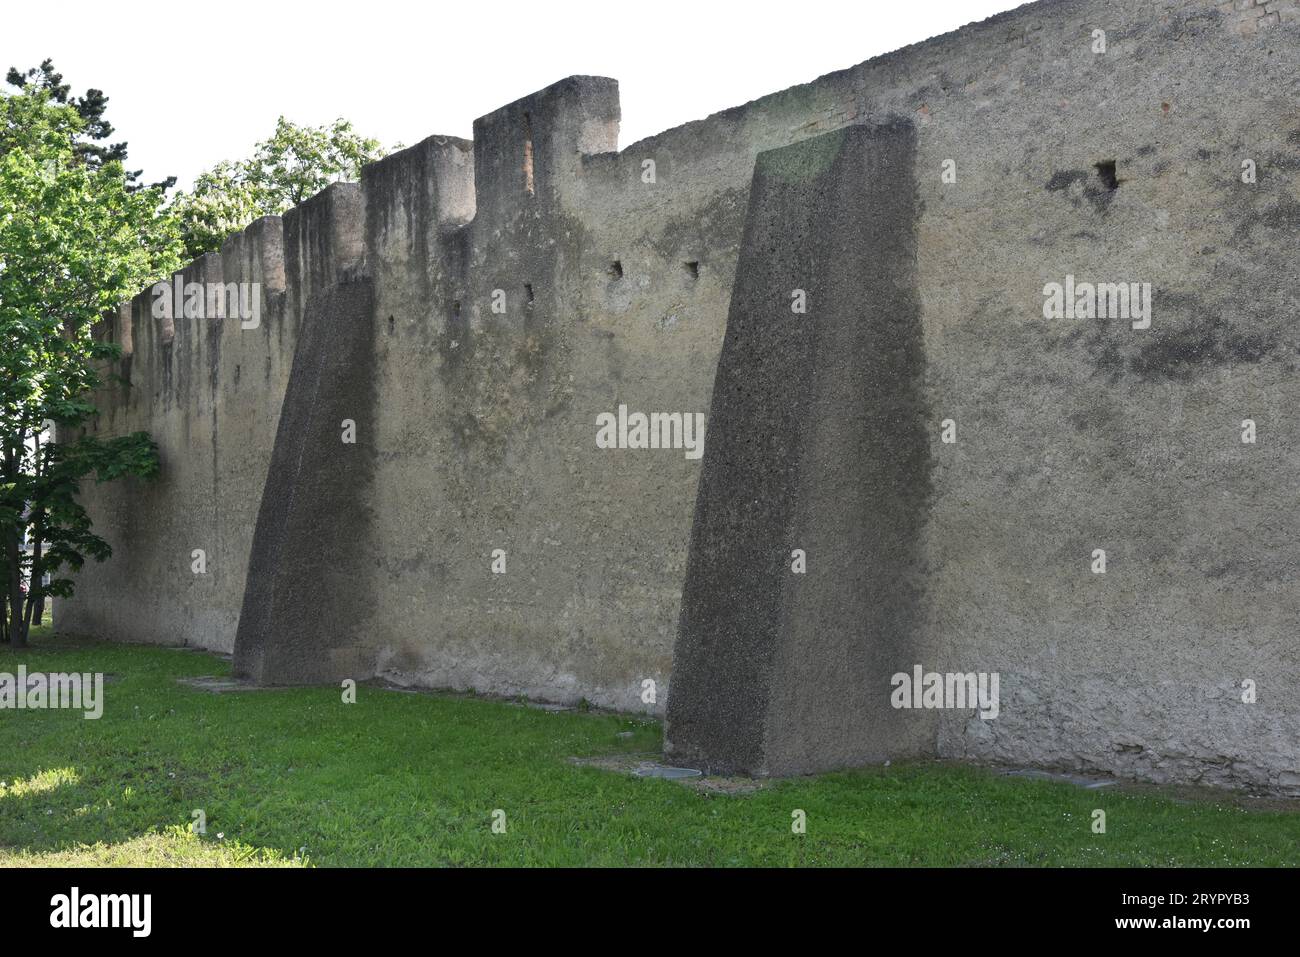 Town fortification of Gross-Enzersdorf, Austria Stock Photo